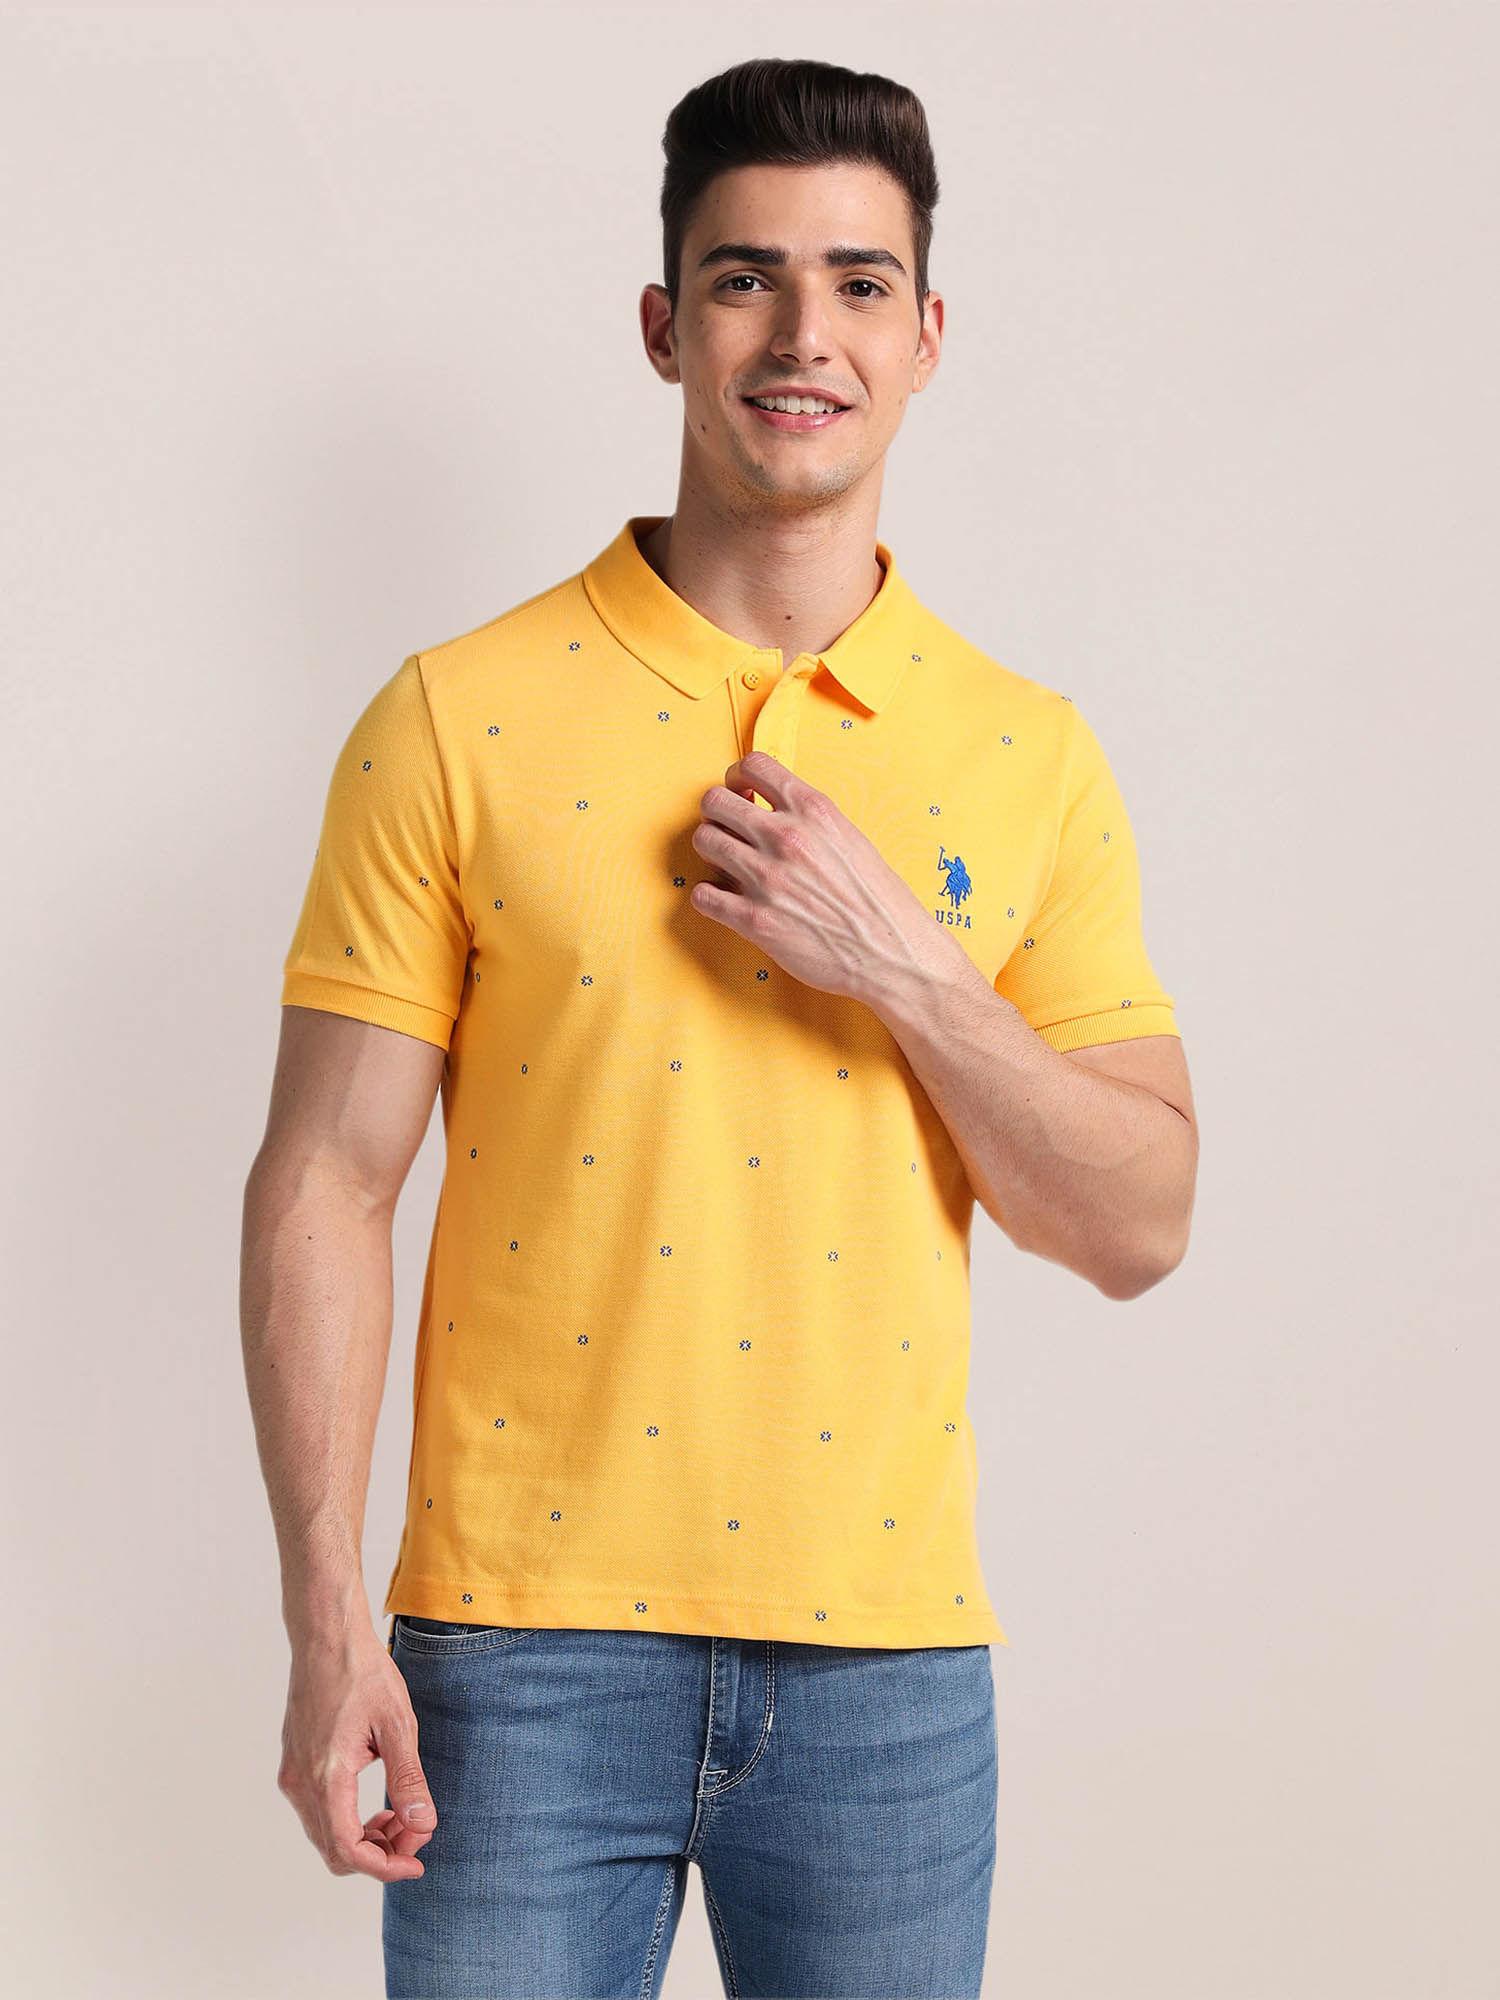 pique knit floral printed polo t-shirt yellow